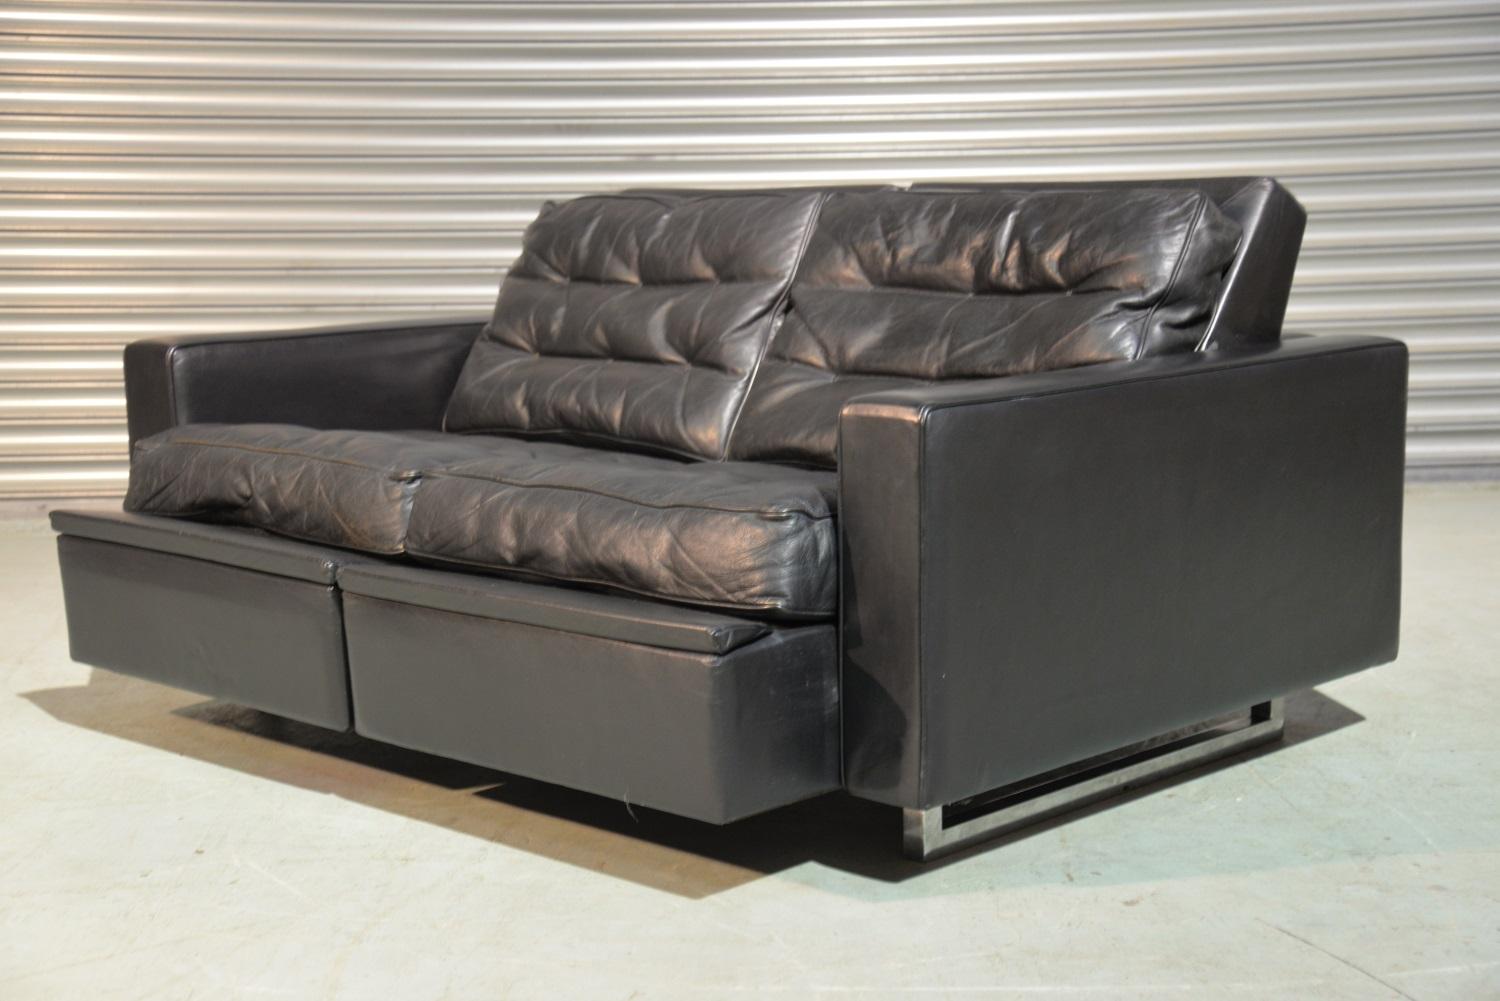 We are delighted to bring to you an ultra rare and beautiful two seater sofa from De Sede of Switzerland with a honeycomb structure in the soft aniline leather making this piece extremely comfortable. The DS-3A is one of their best-known pieces of